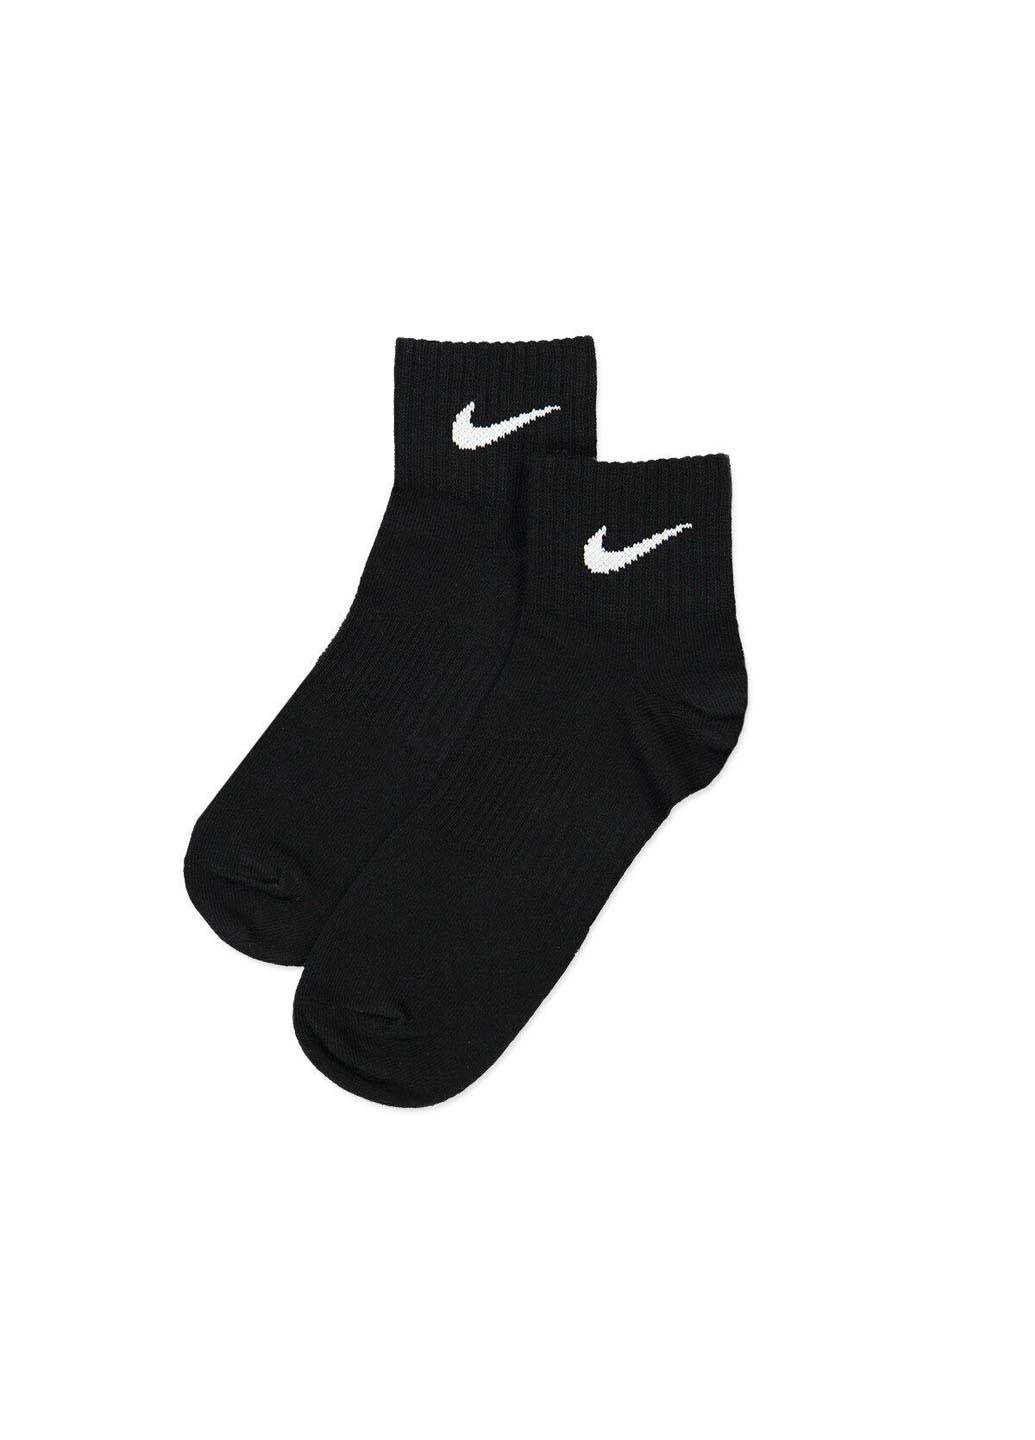 Носки Nike everyday cushion ankle 3-pack (255920542)